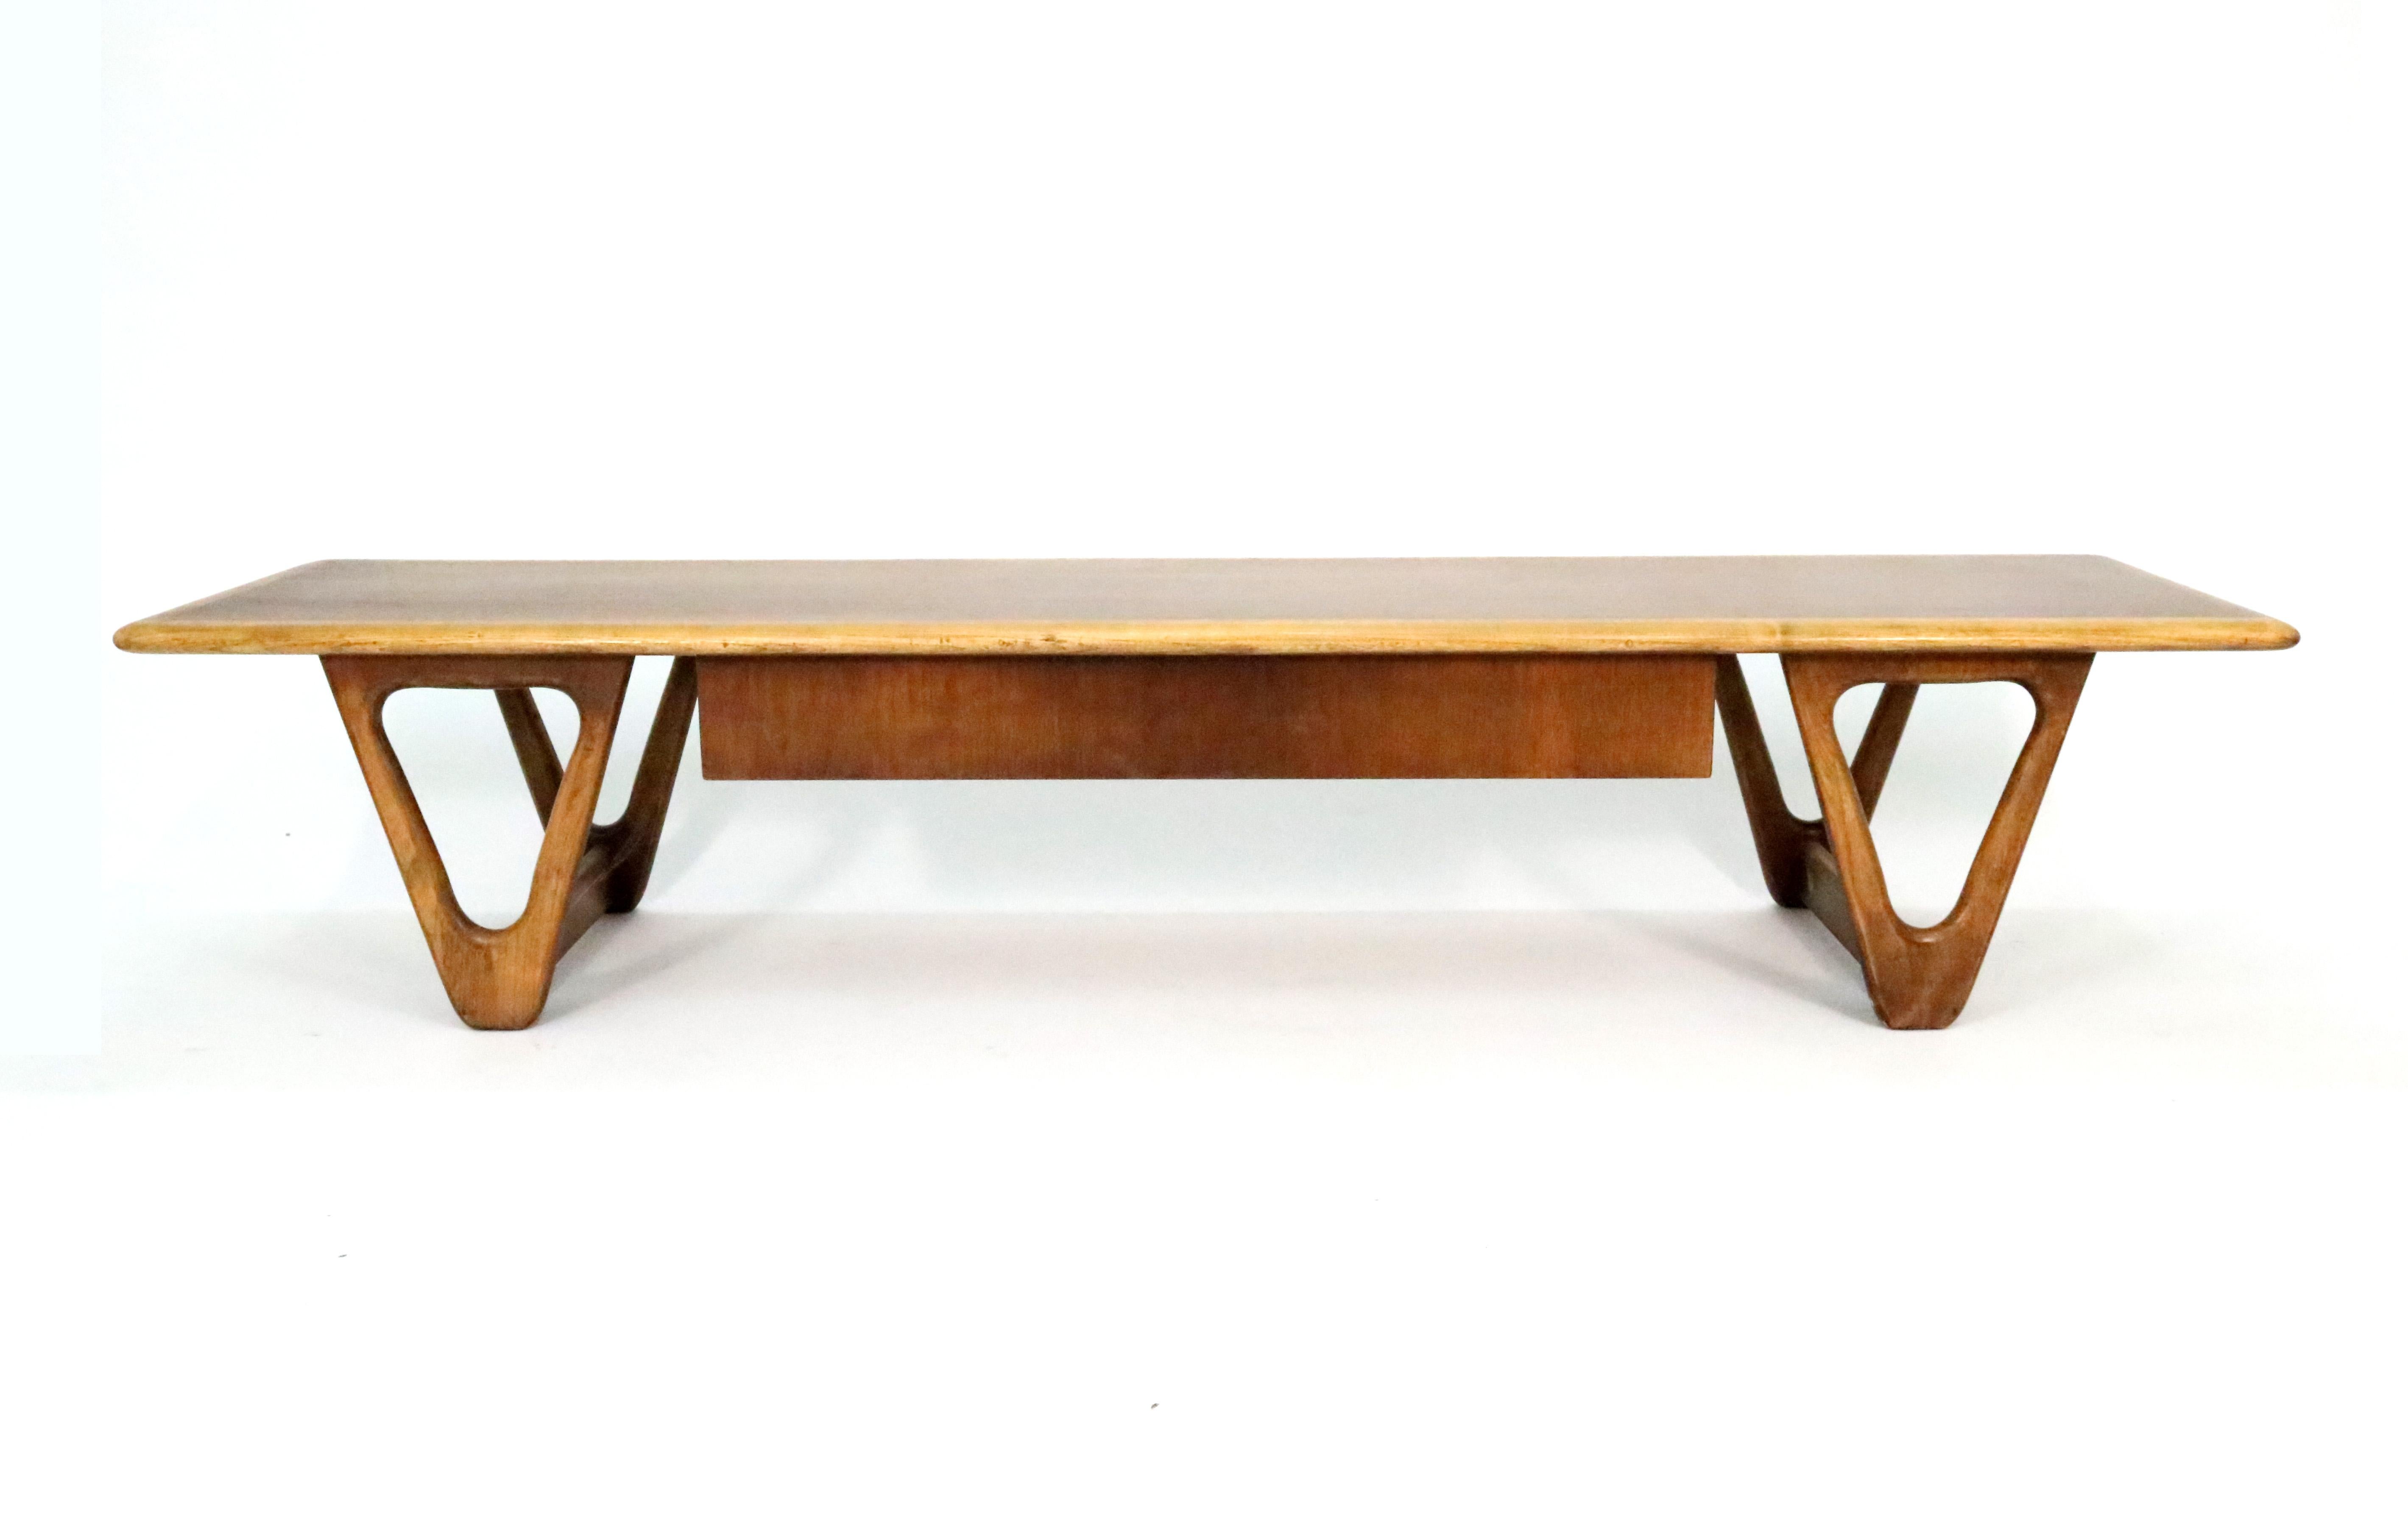 'Perception' walnut coffee table with lattice-front drawers and triangle legs by Warren Church for Lane.